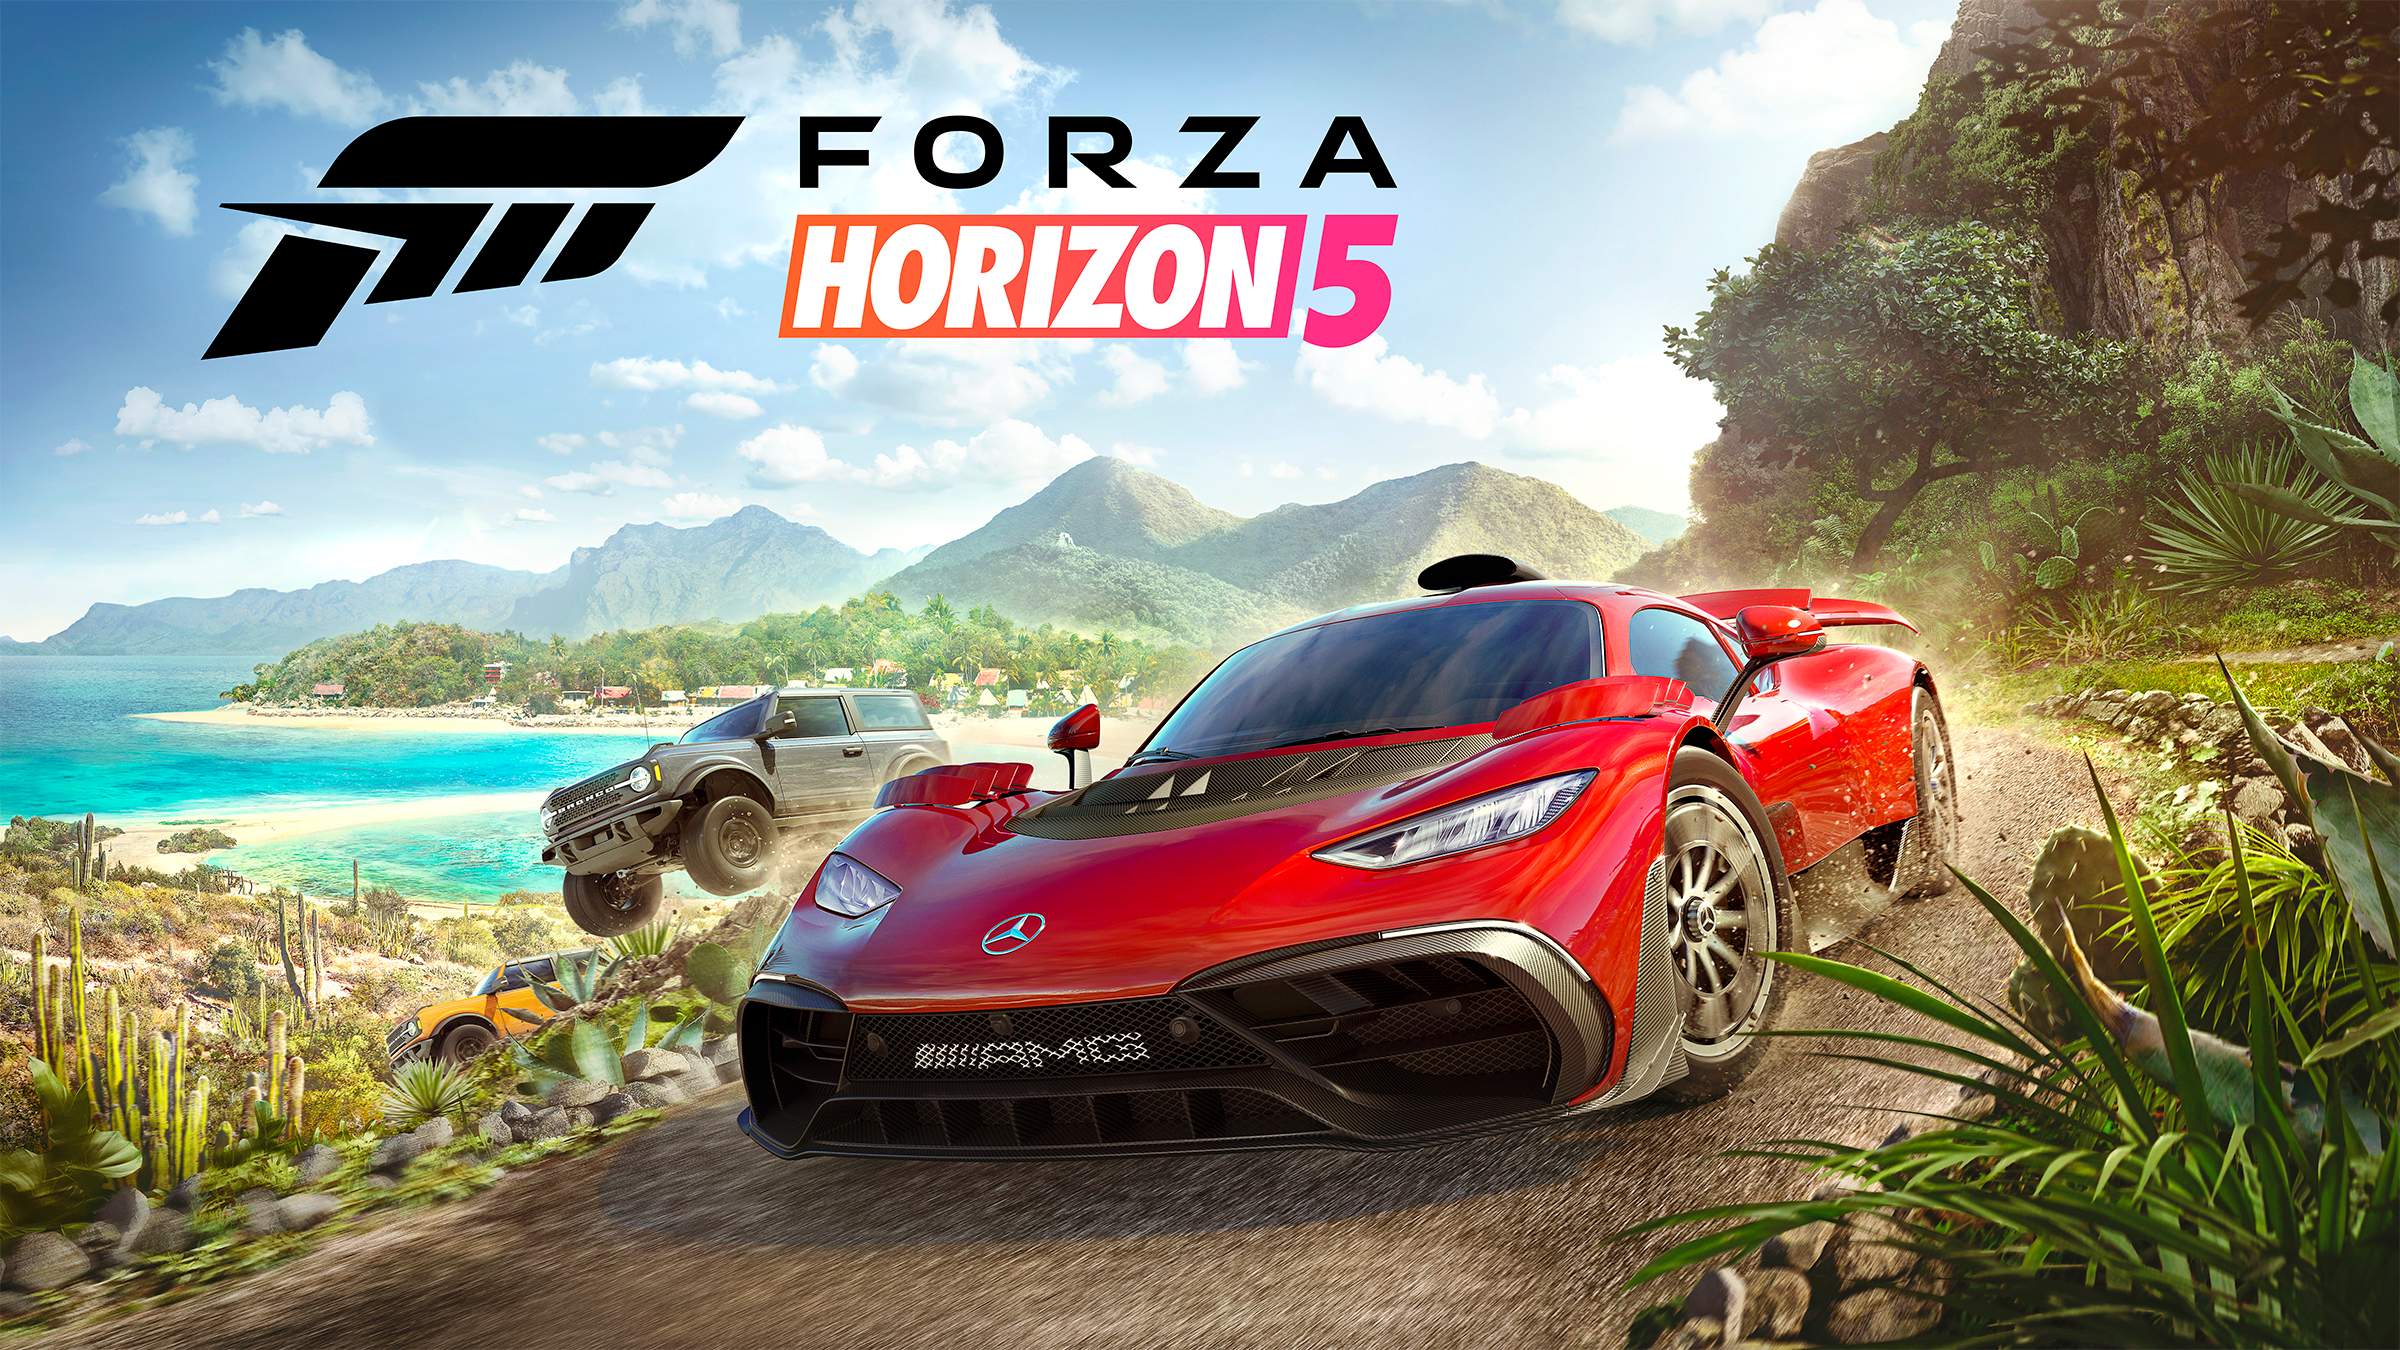 Modder uses Cheat engine to enable ray tracing in Forza Horizon 5's